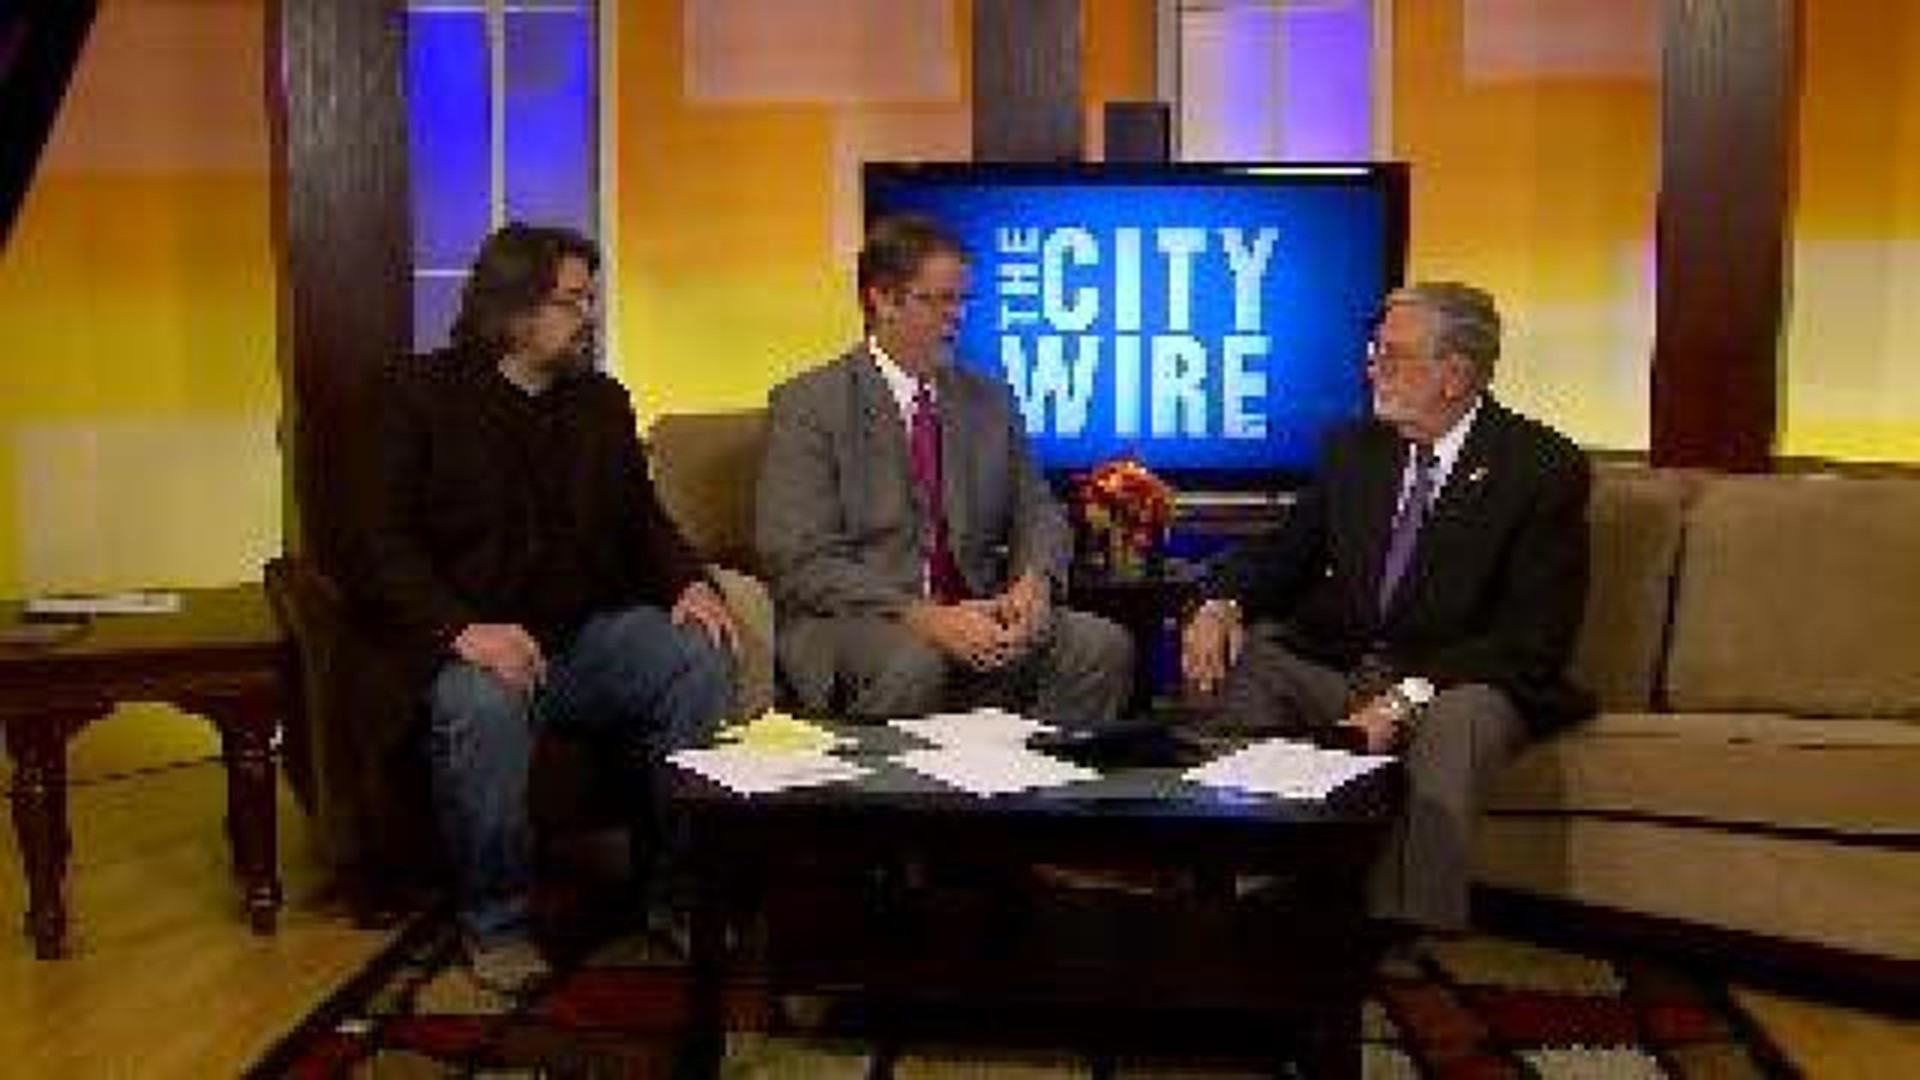 Fort Smith Mayor on The City Wire